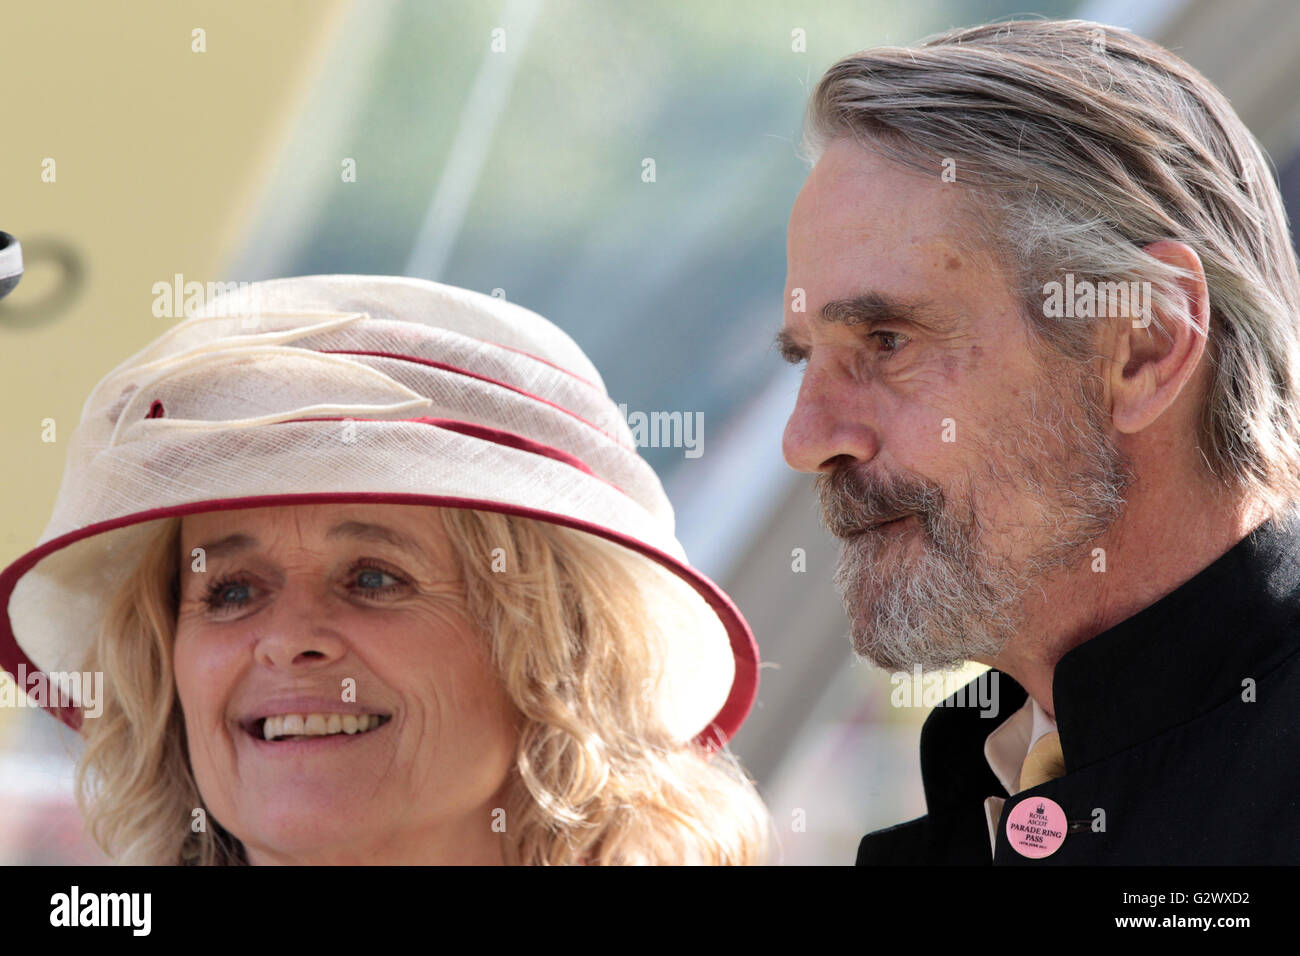 18.06.2015, Ascot , Berkshire, Grossbritannien - Actor Jeremy Irons and Sinead Cusack wife. 00S150618D796CAROEX.JPG - NOT for SALE in G E R M A N Y, A U S T R I A, S W I T Z E R L A N D [MODEL RELEASE: NO, PROPERTY RELEASE: NO, (c) caro photo agency / Sorge, http://www.caro-images.com, info@carofoto.pl - Any use of this picture is subject to royalty!] Stock Photo